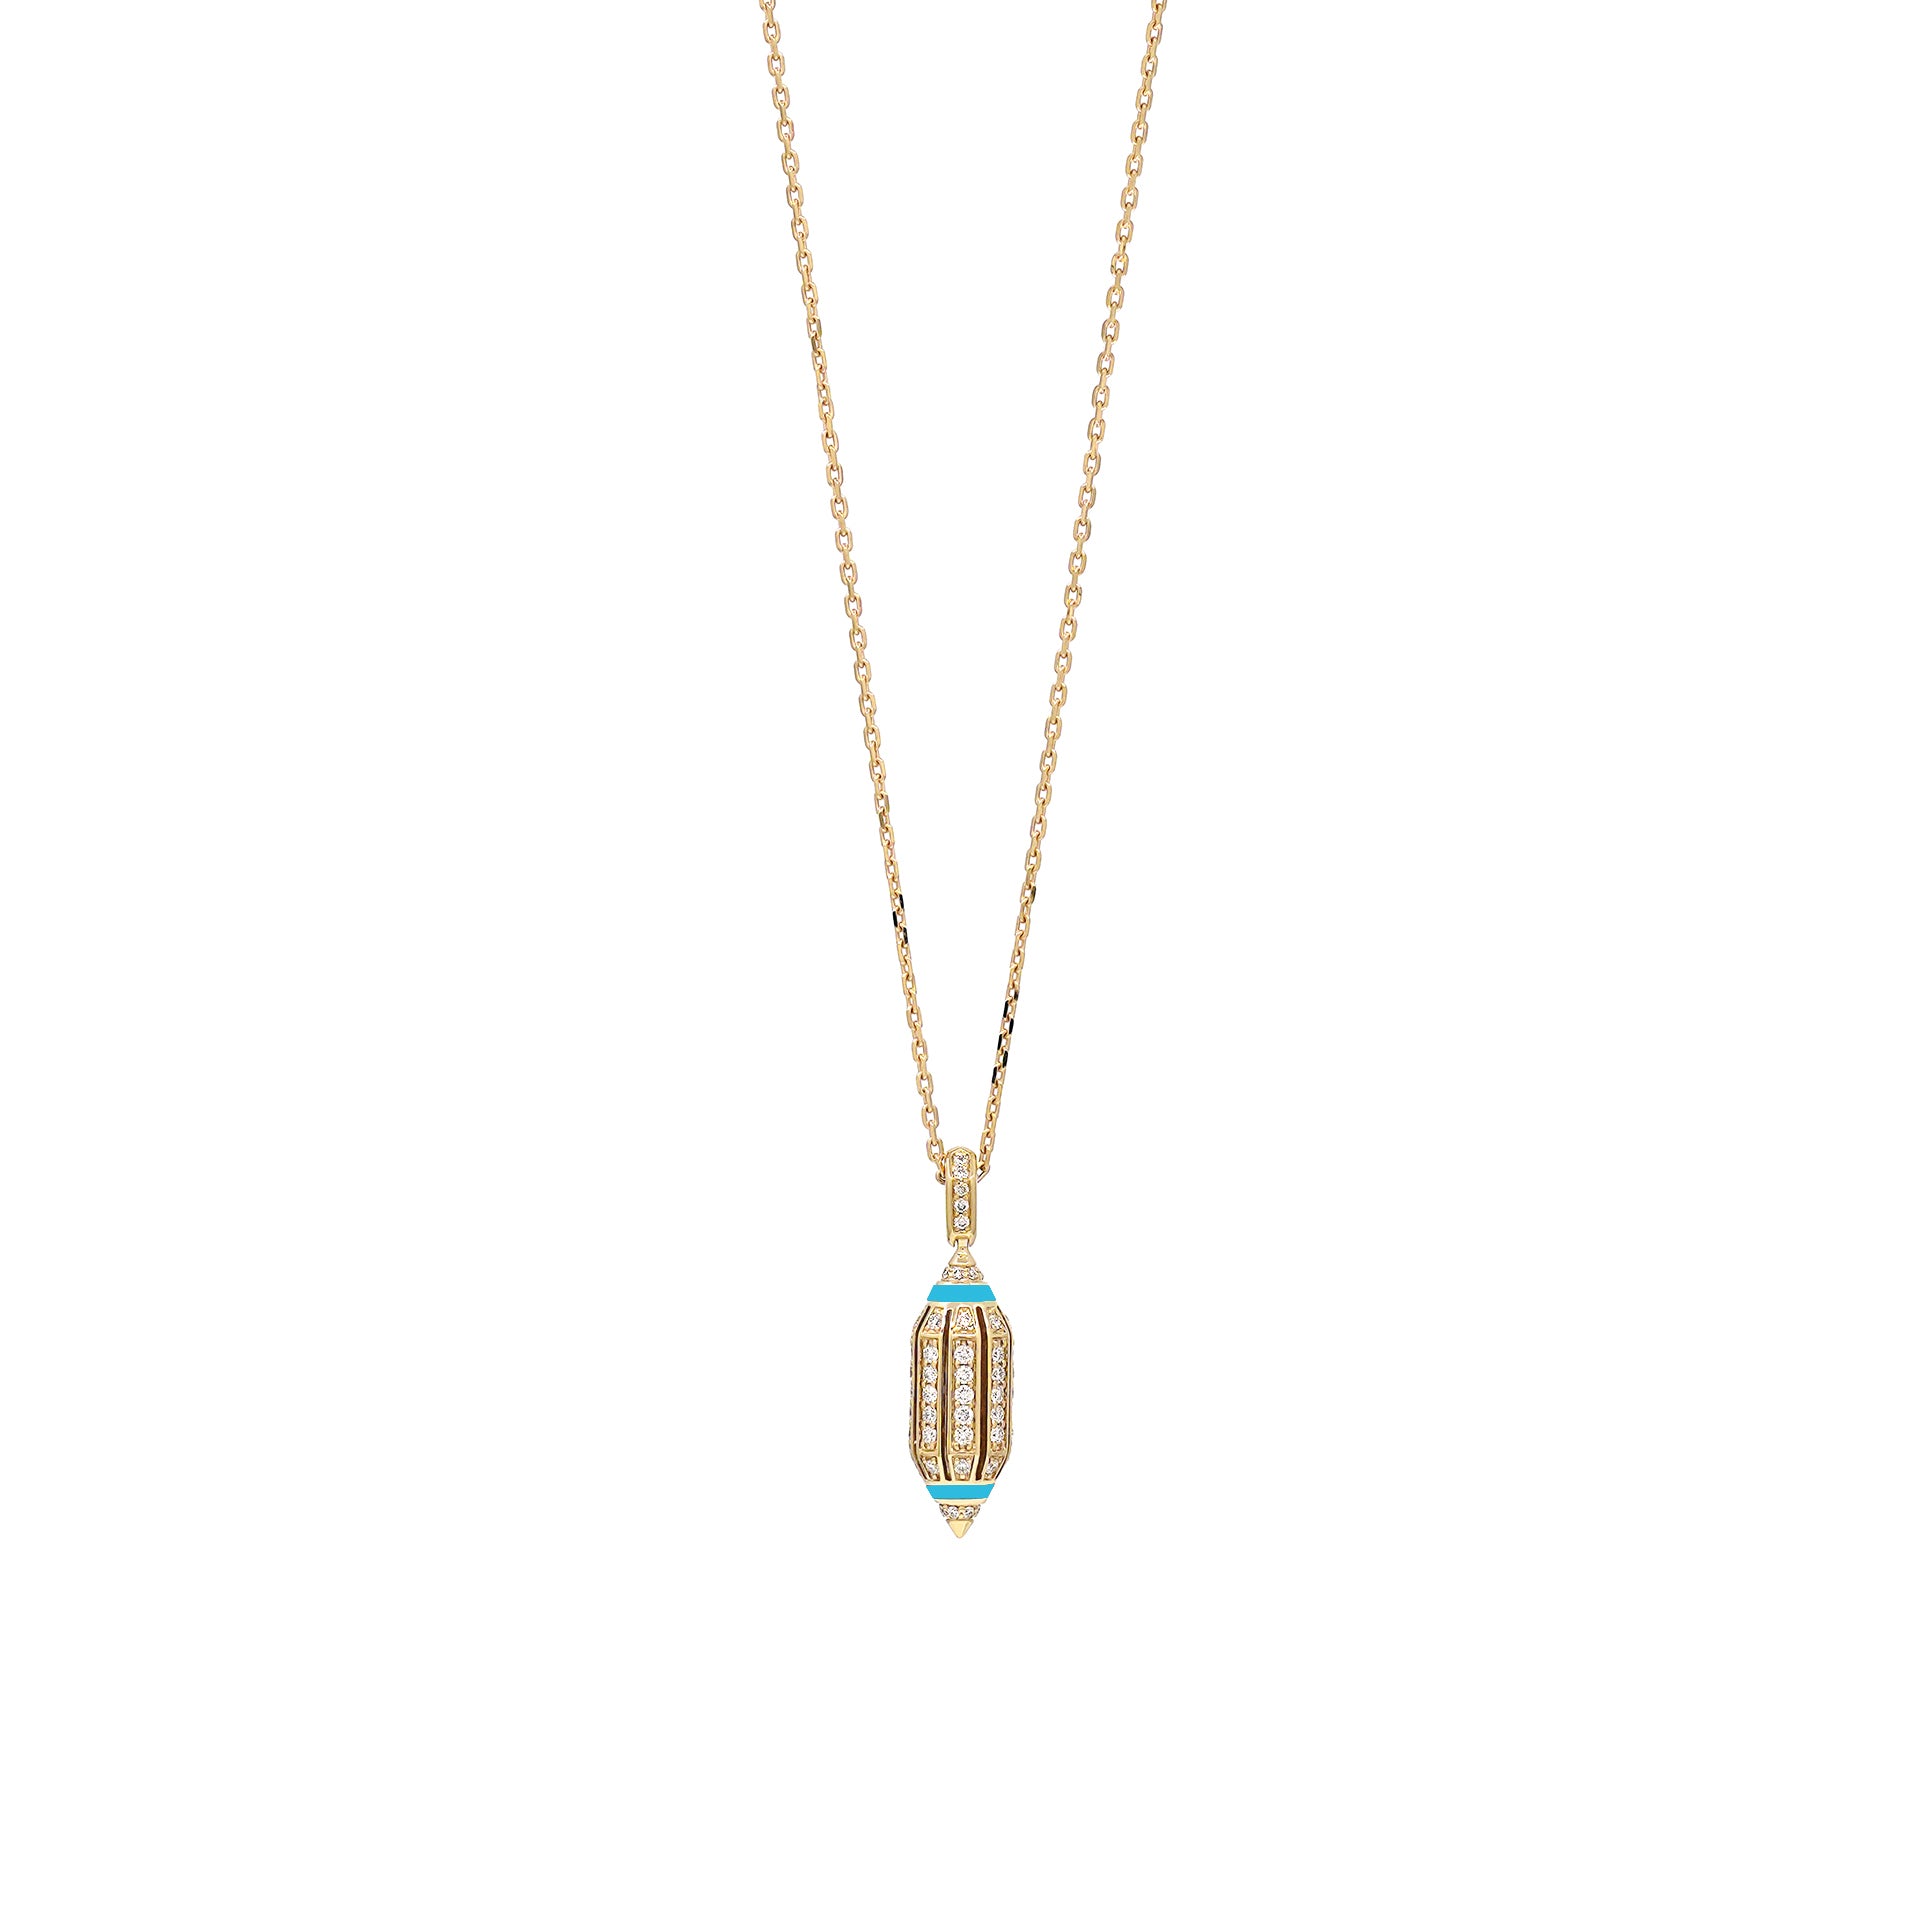 Al Merriyah Hyceram Necklace in Yellow Gold with Diamonds